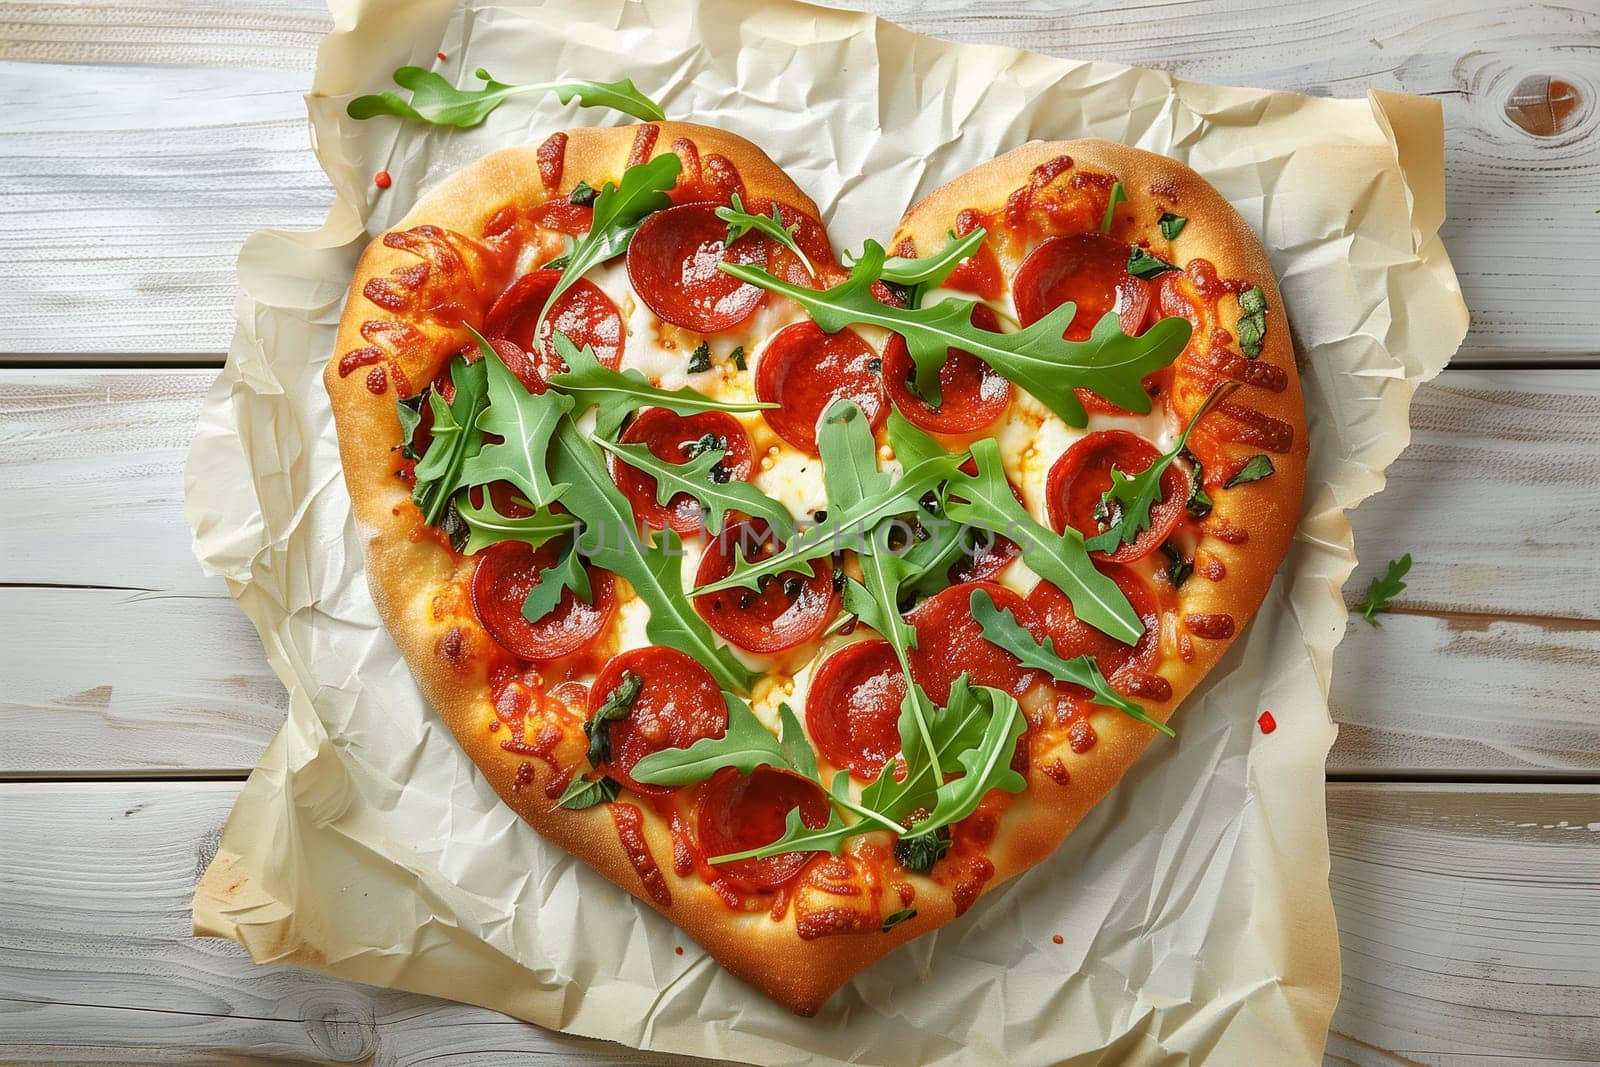 Heart-Shaped Pepperoni Pizza With Fresh Arugula on Wooden Table by Sd28DimoN_1976